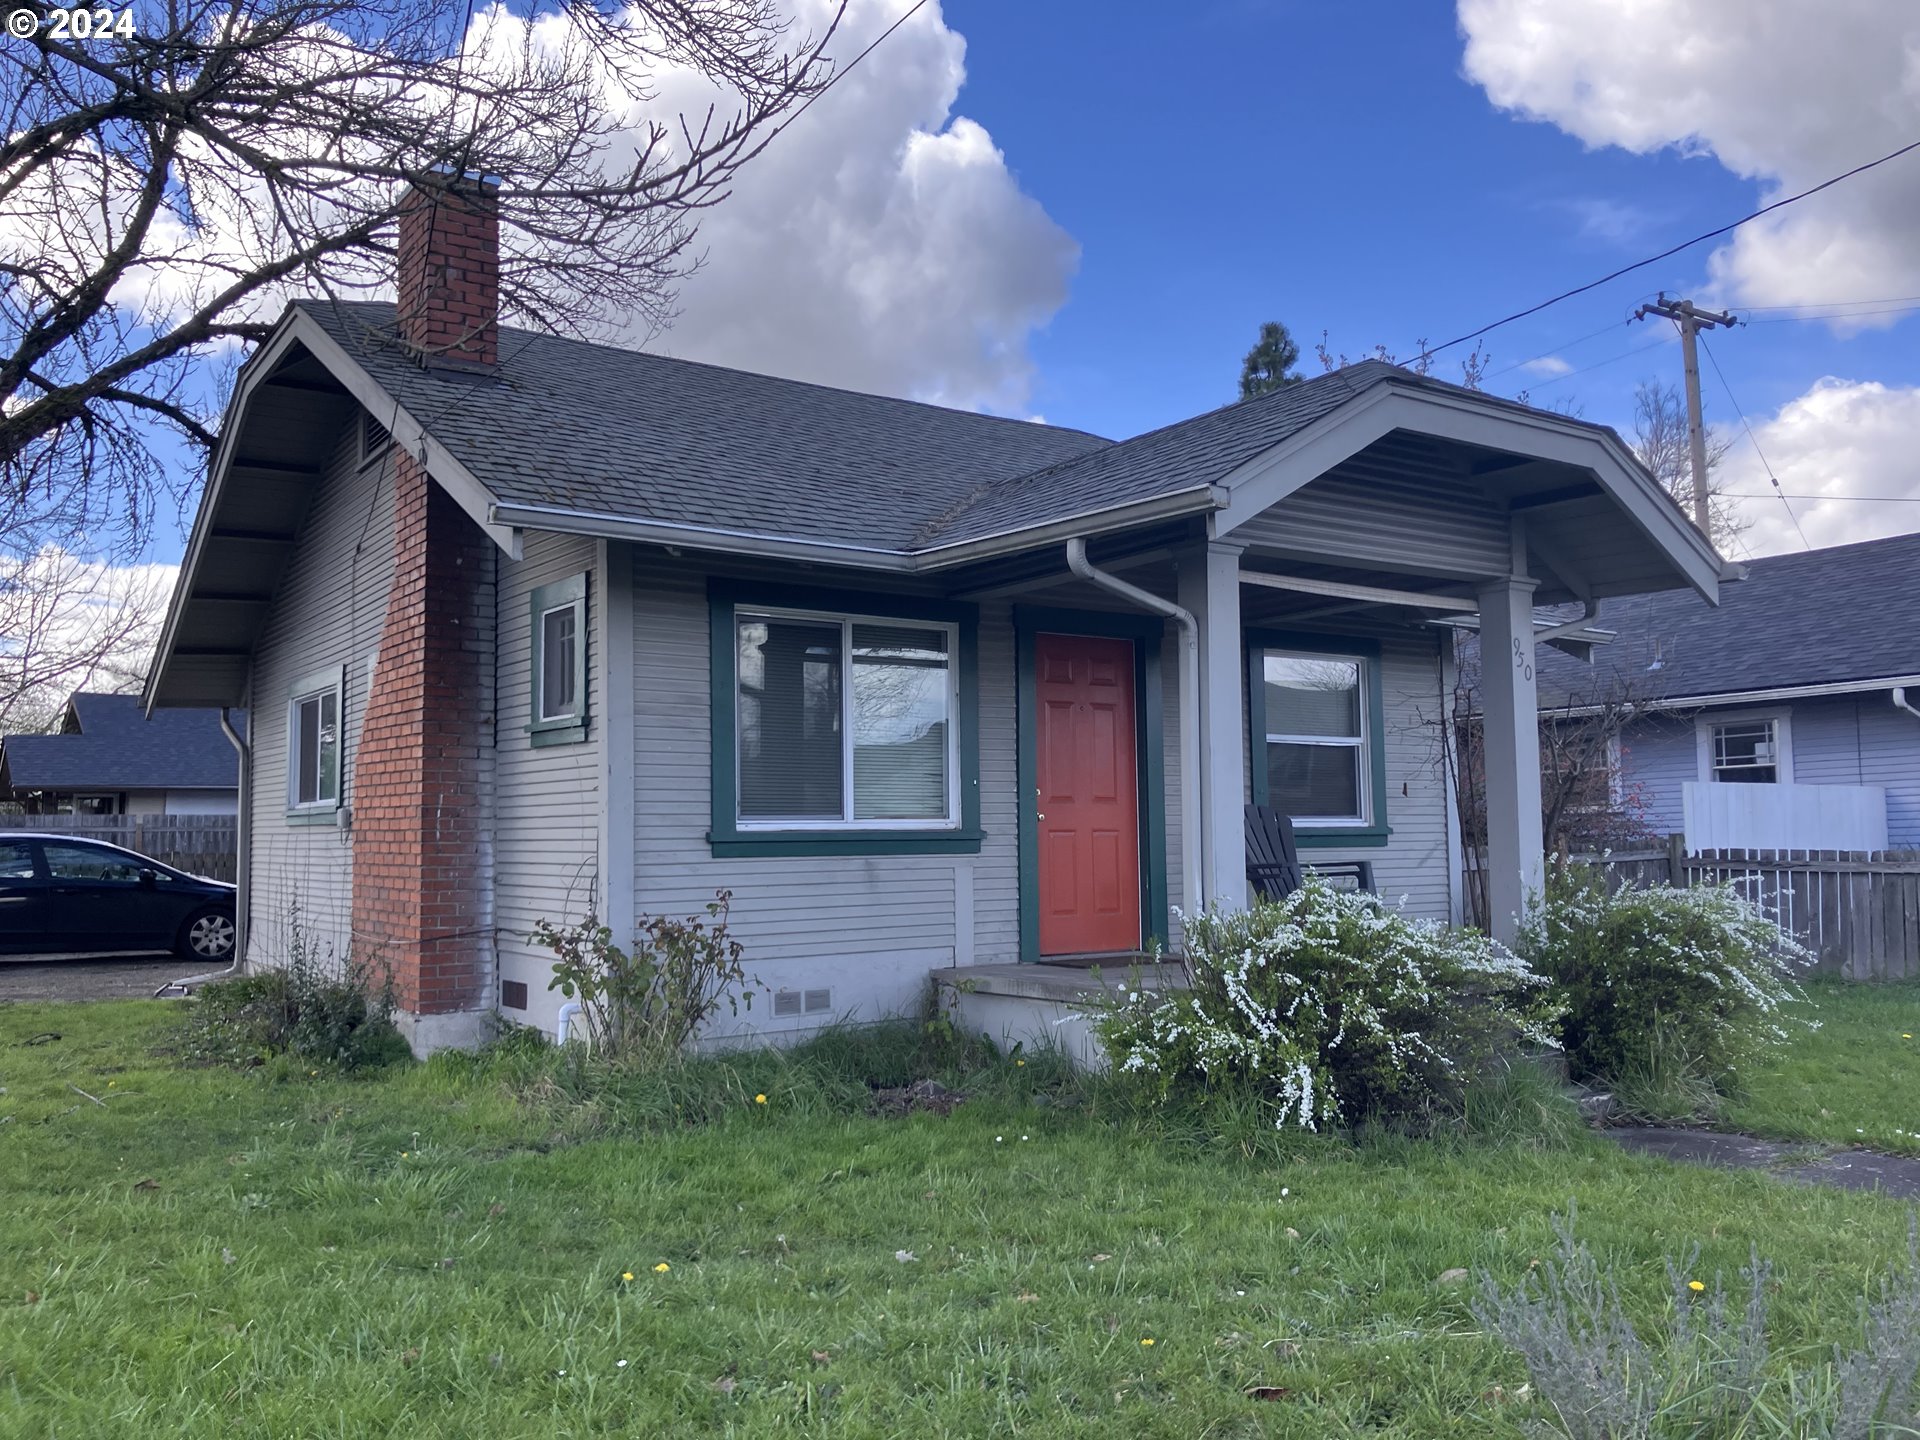 950 CHAMBERS ST, Eugene, OR 